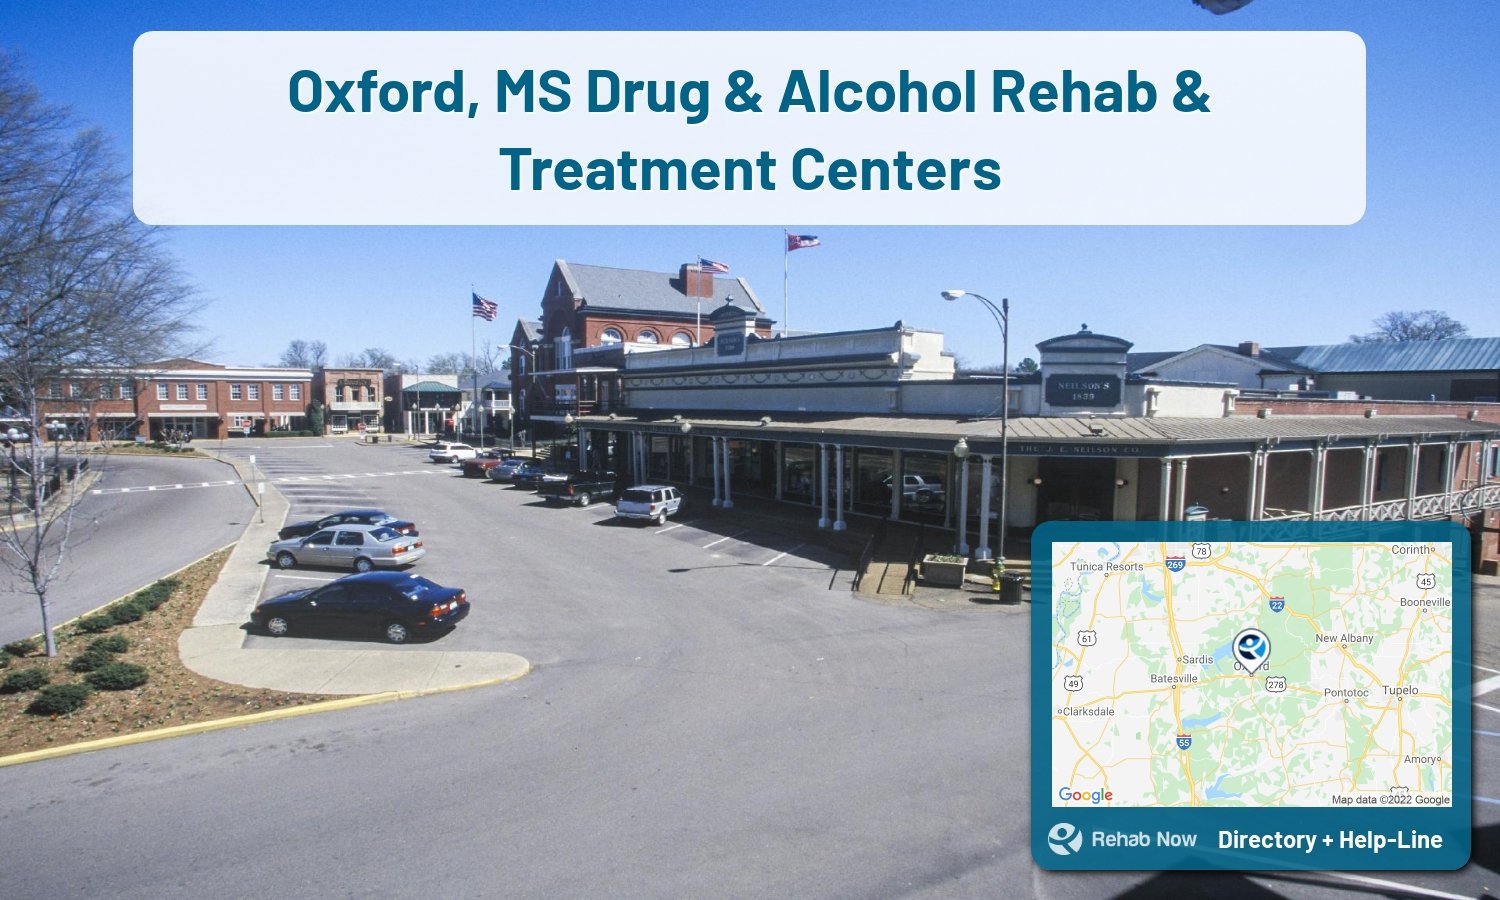 View options, availability, treatment methods, and more, for drug rehab and alcohol treatment in Oxford, Mississippi